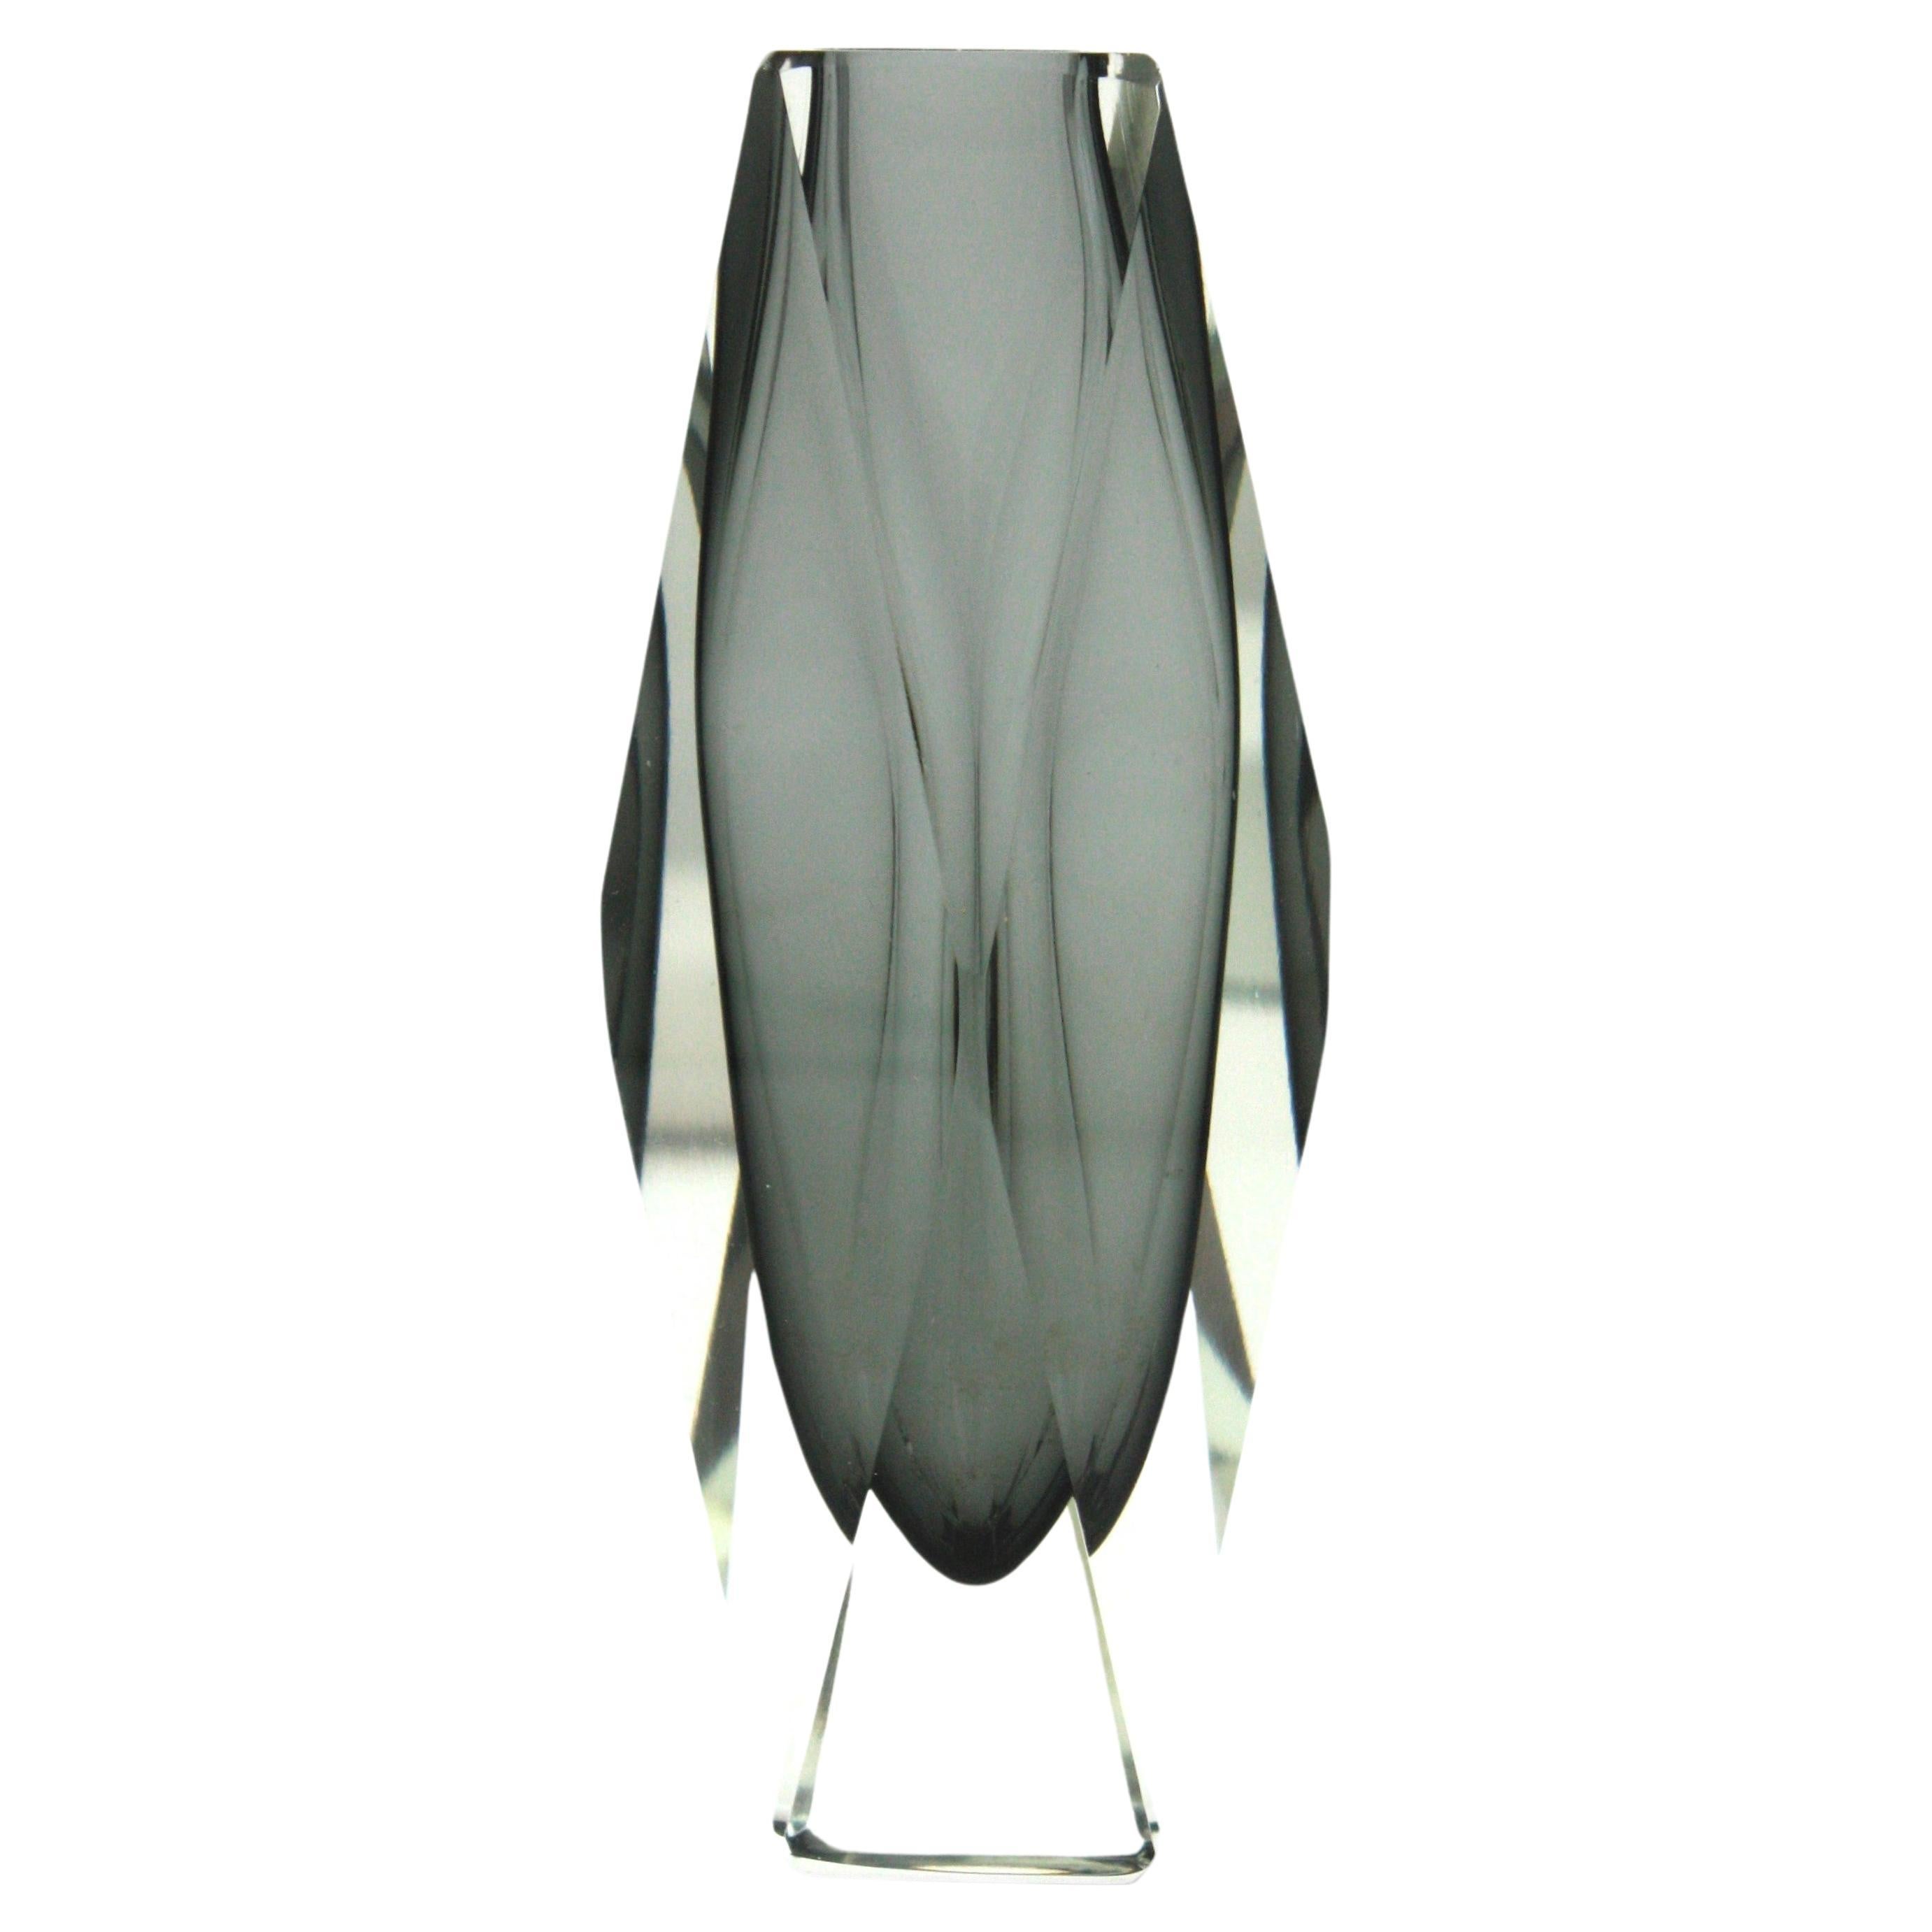 Mandruzzato Murano Sommerso Smoked Grey Clear Faceted Art Glass Vase In Excellent Condition For Sale In Barcelona, ES